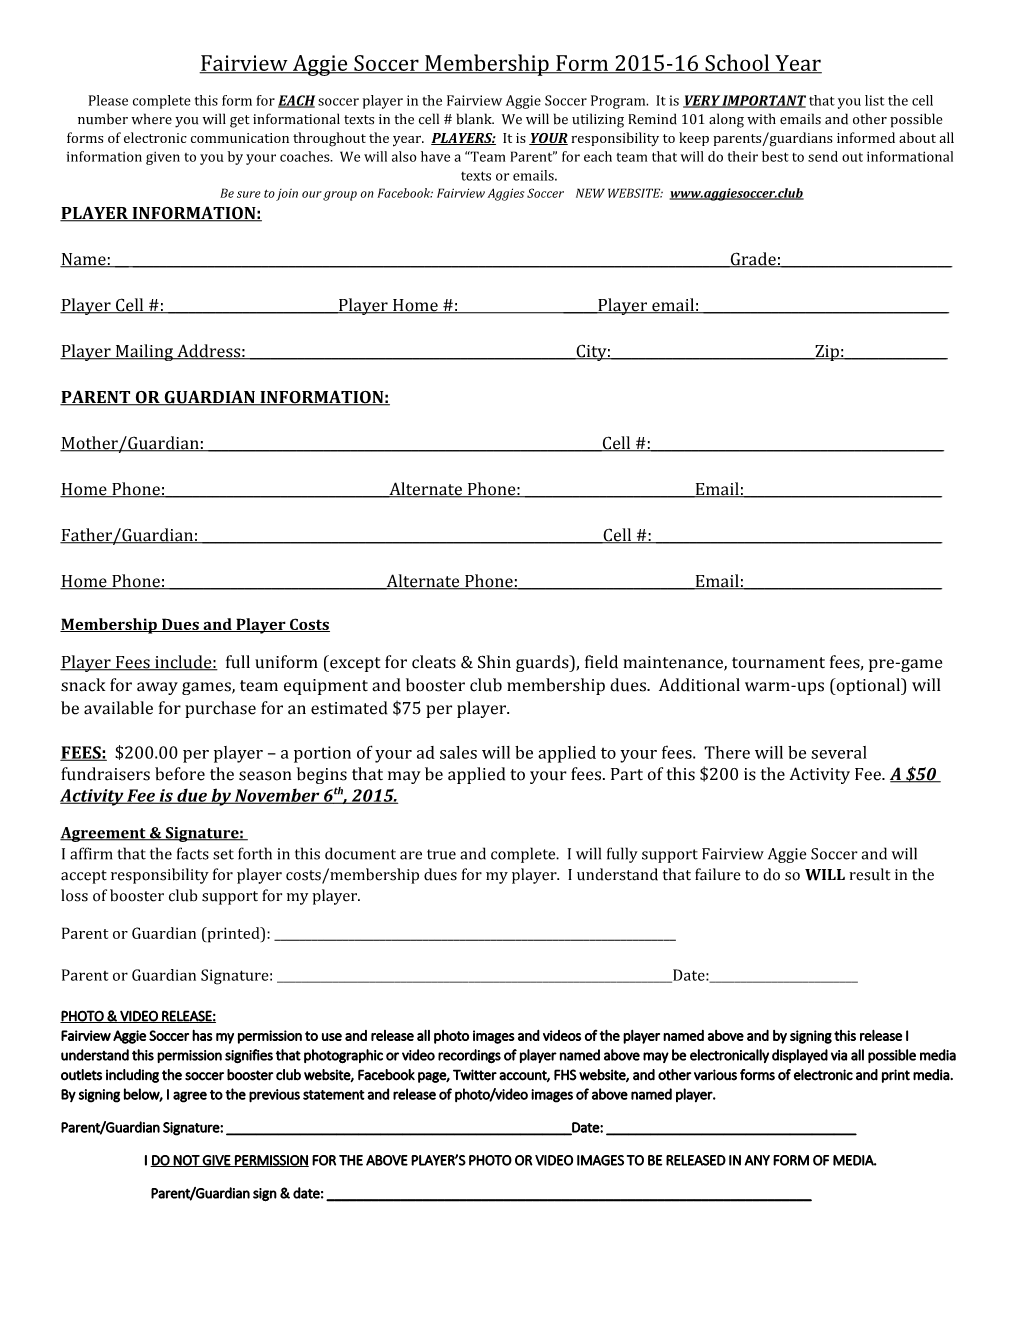 Fairview Aggie Soccer Membership Form 2015-16 School Year